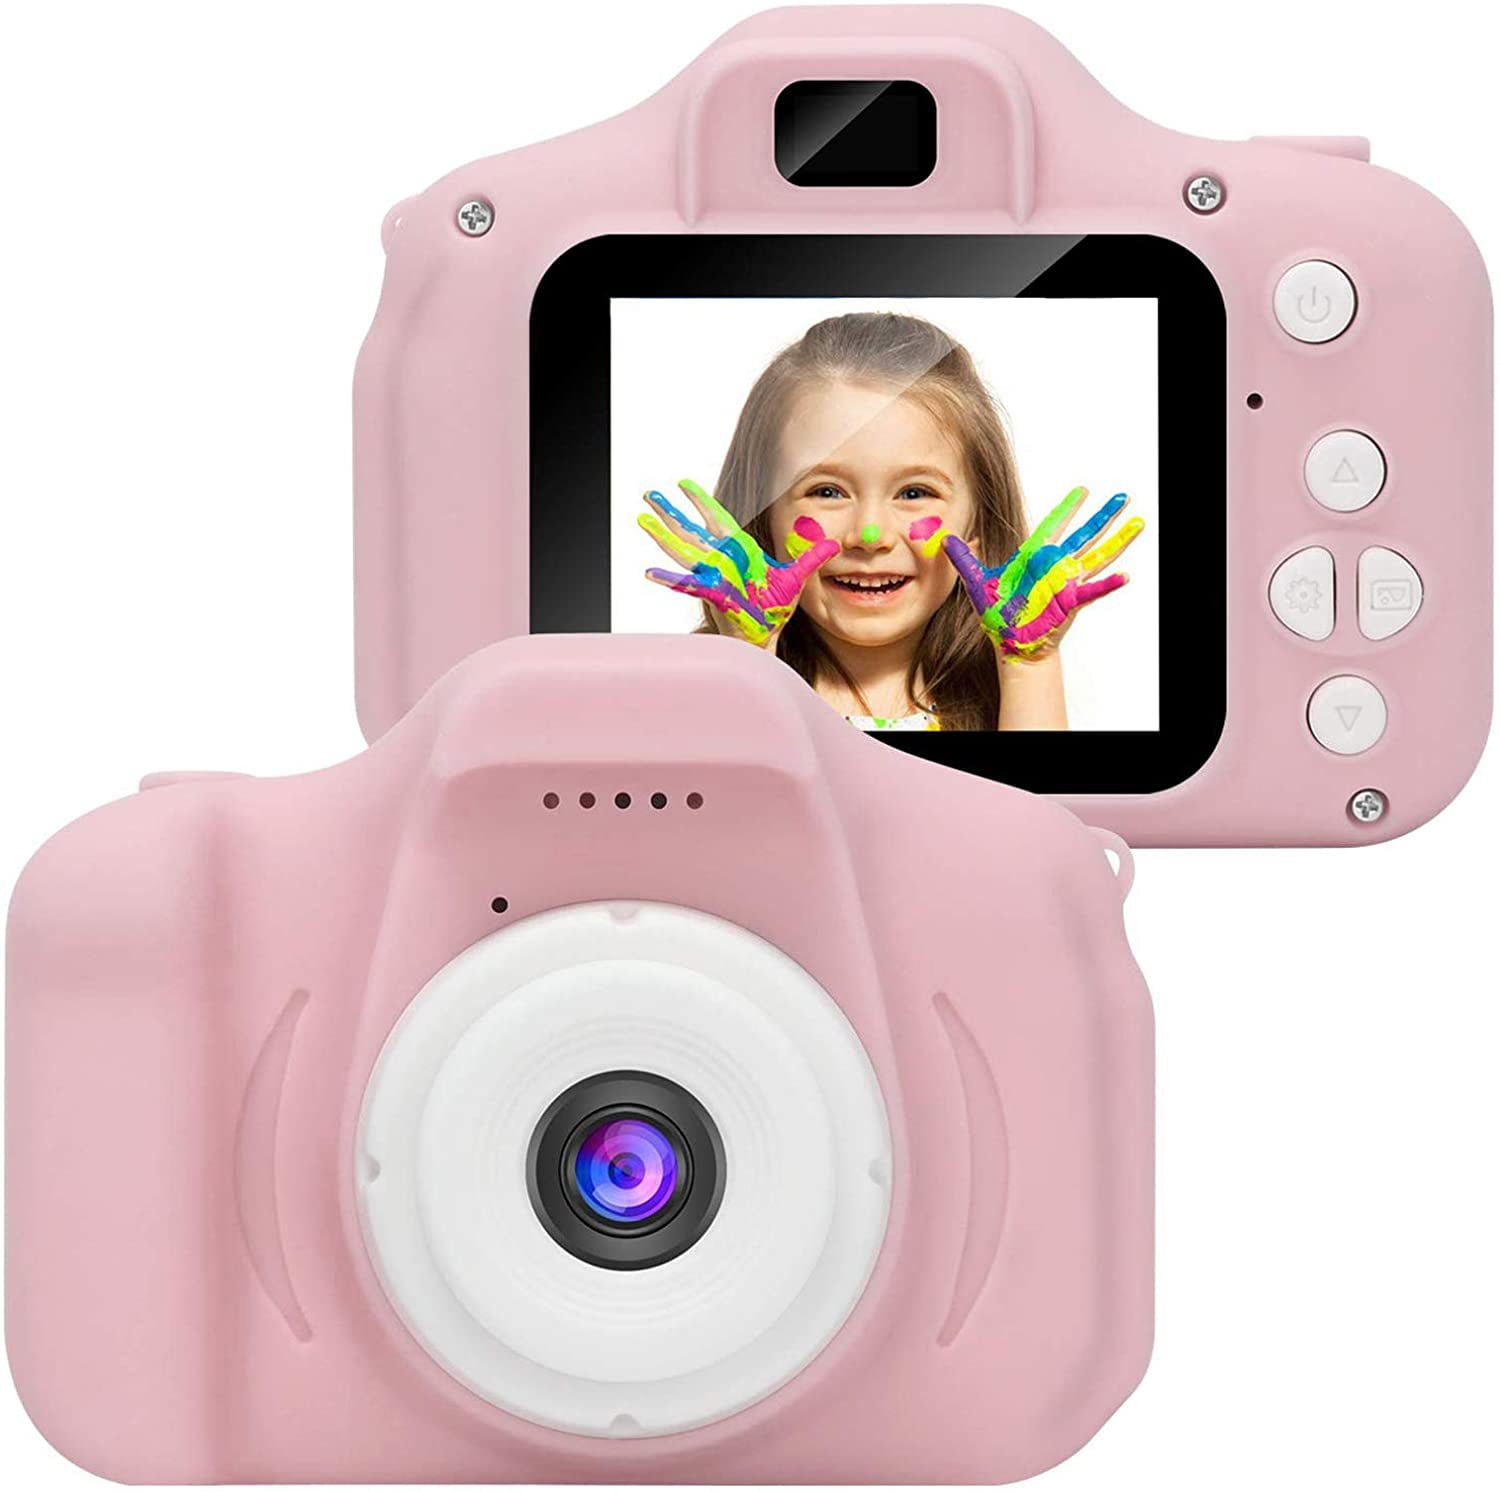 16GB Memory Card Included SANOTO Kids Camera Mini Video Camera Child Camcorder Gift for 3-8 Years Old Girls Boys Digital Camera for Kids 